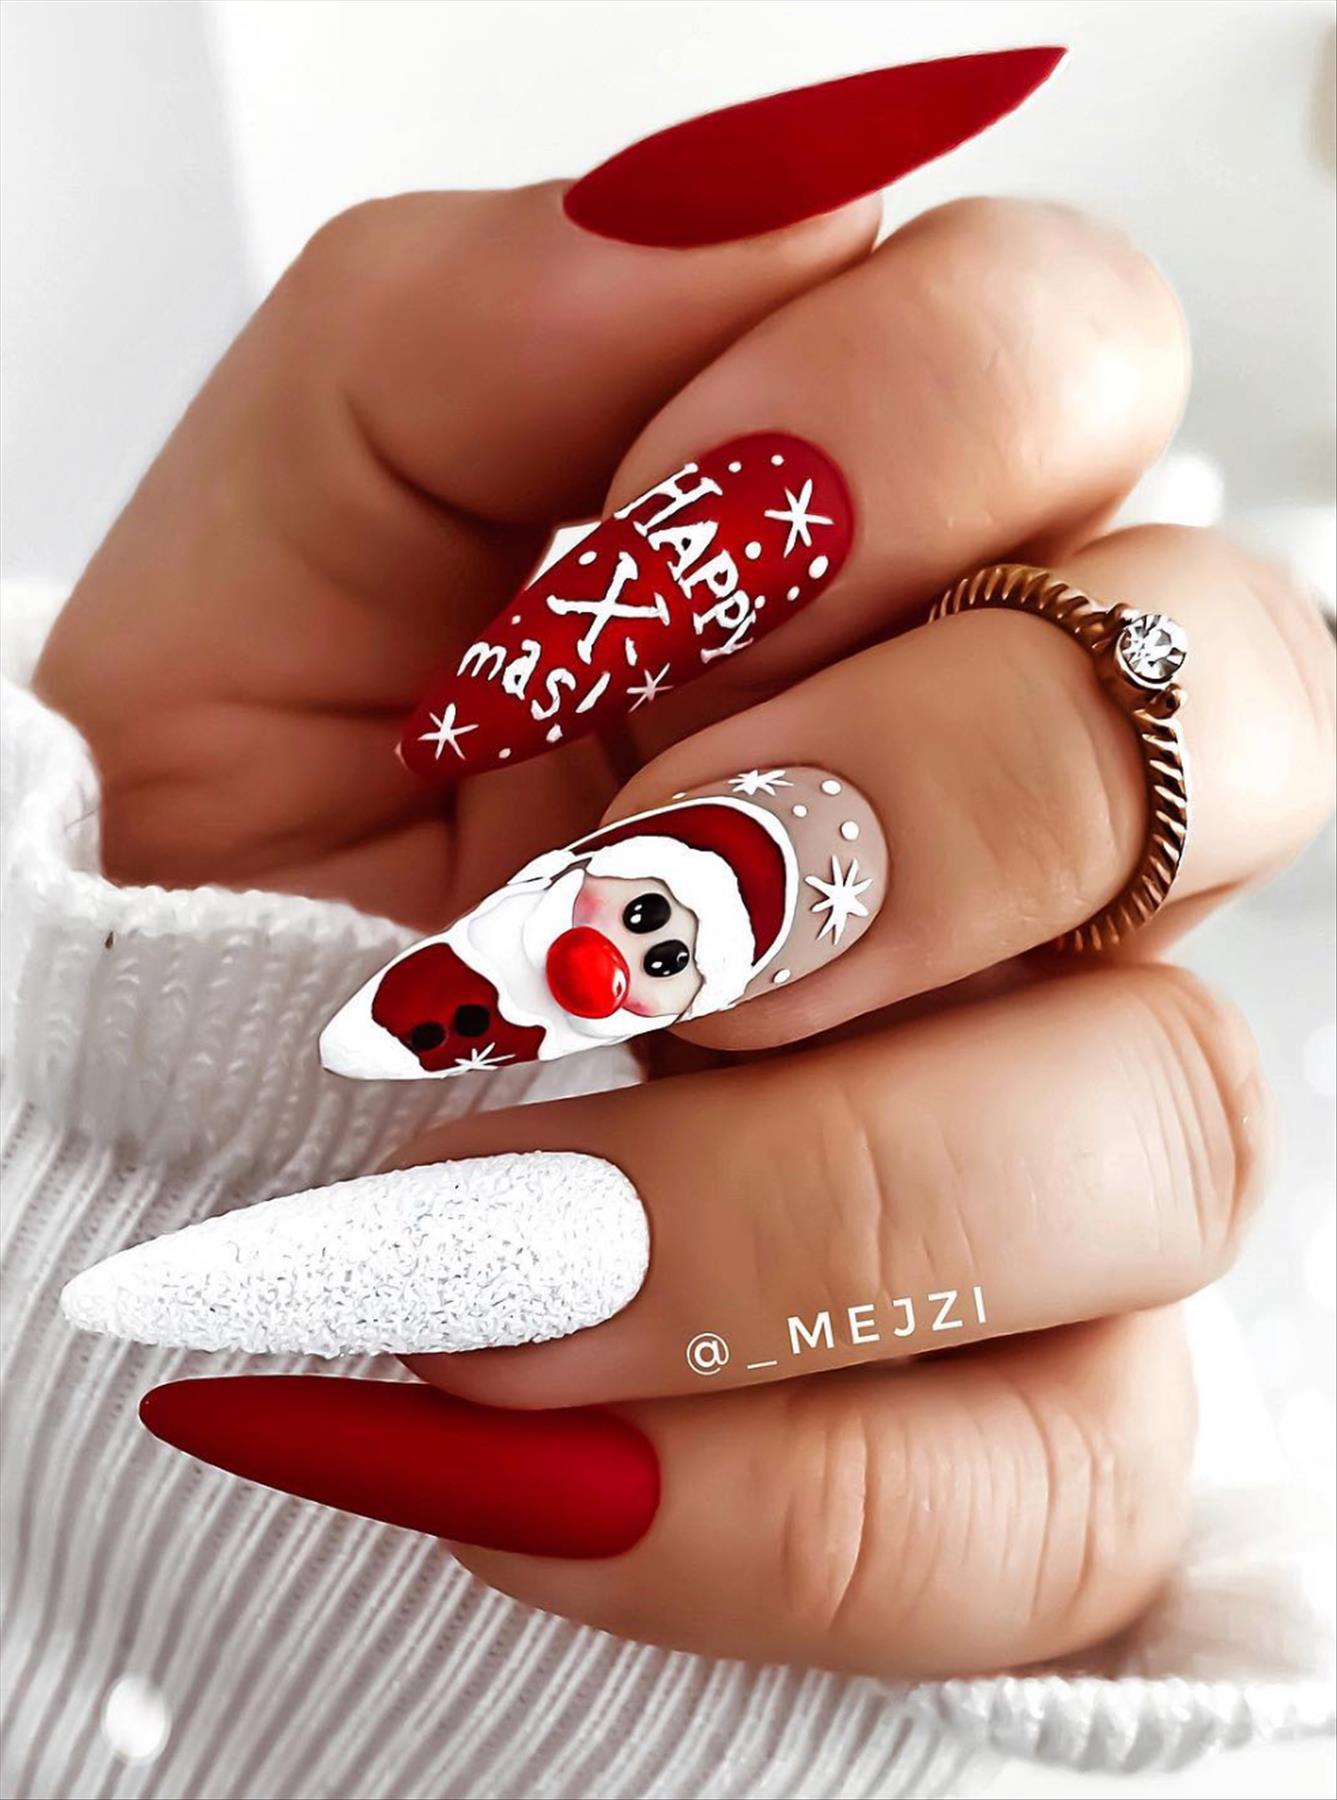 Merry Christmas nail designs to get inspired in 2022